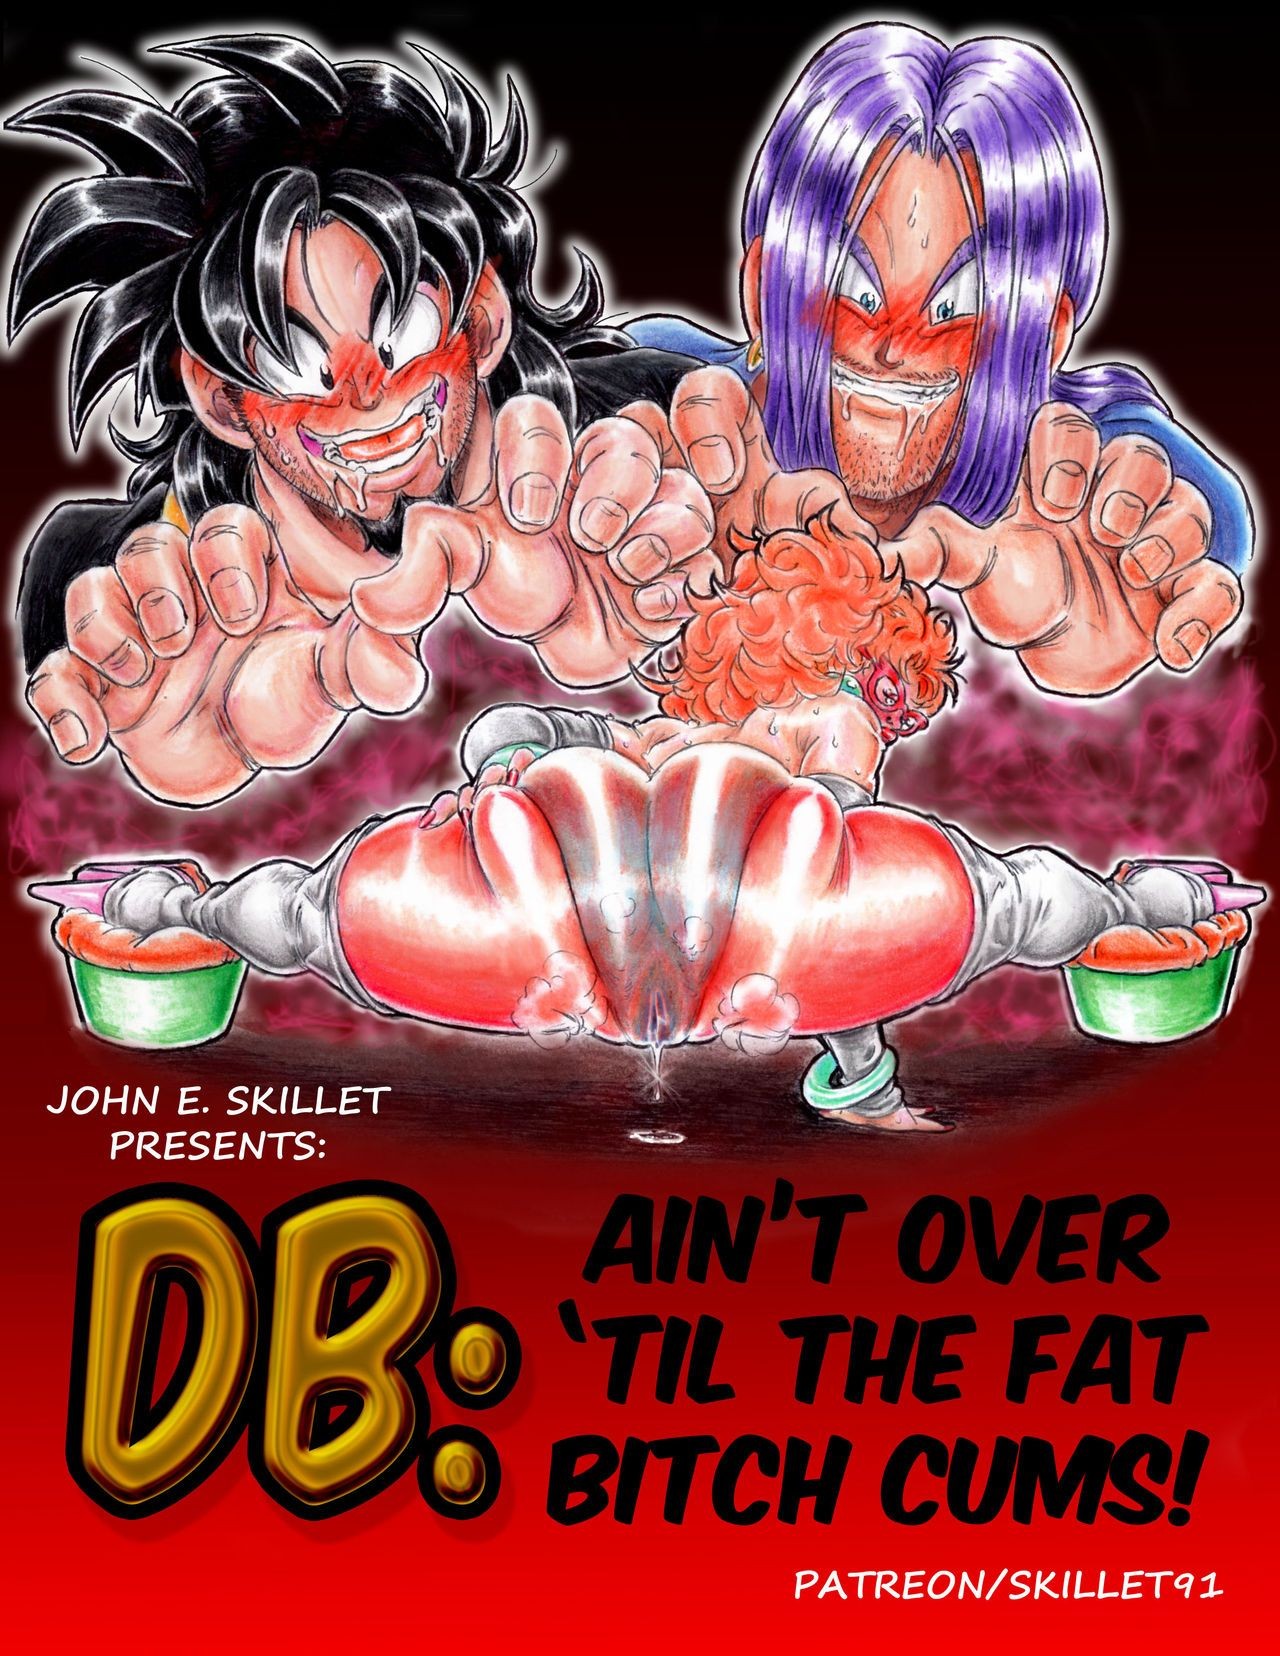 Gayemo [Skillet91] Ain't Over 'til The Fat Bitch Cums! (Dragon Ball Z) [Ongoing] Young Men